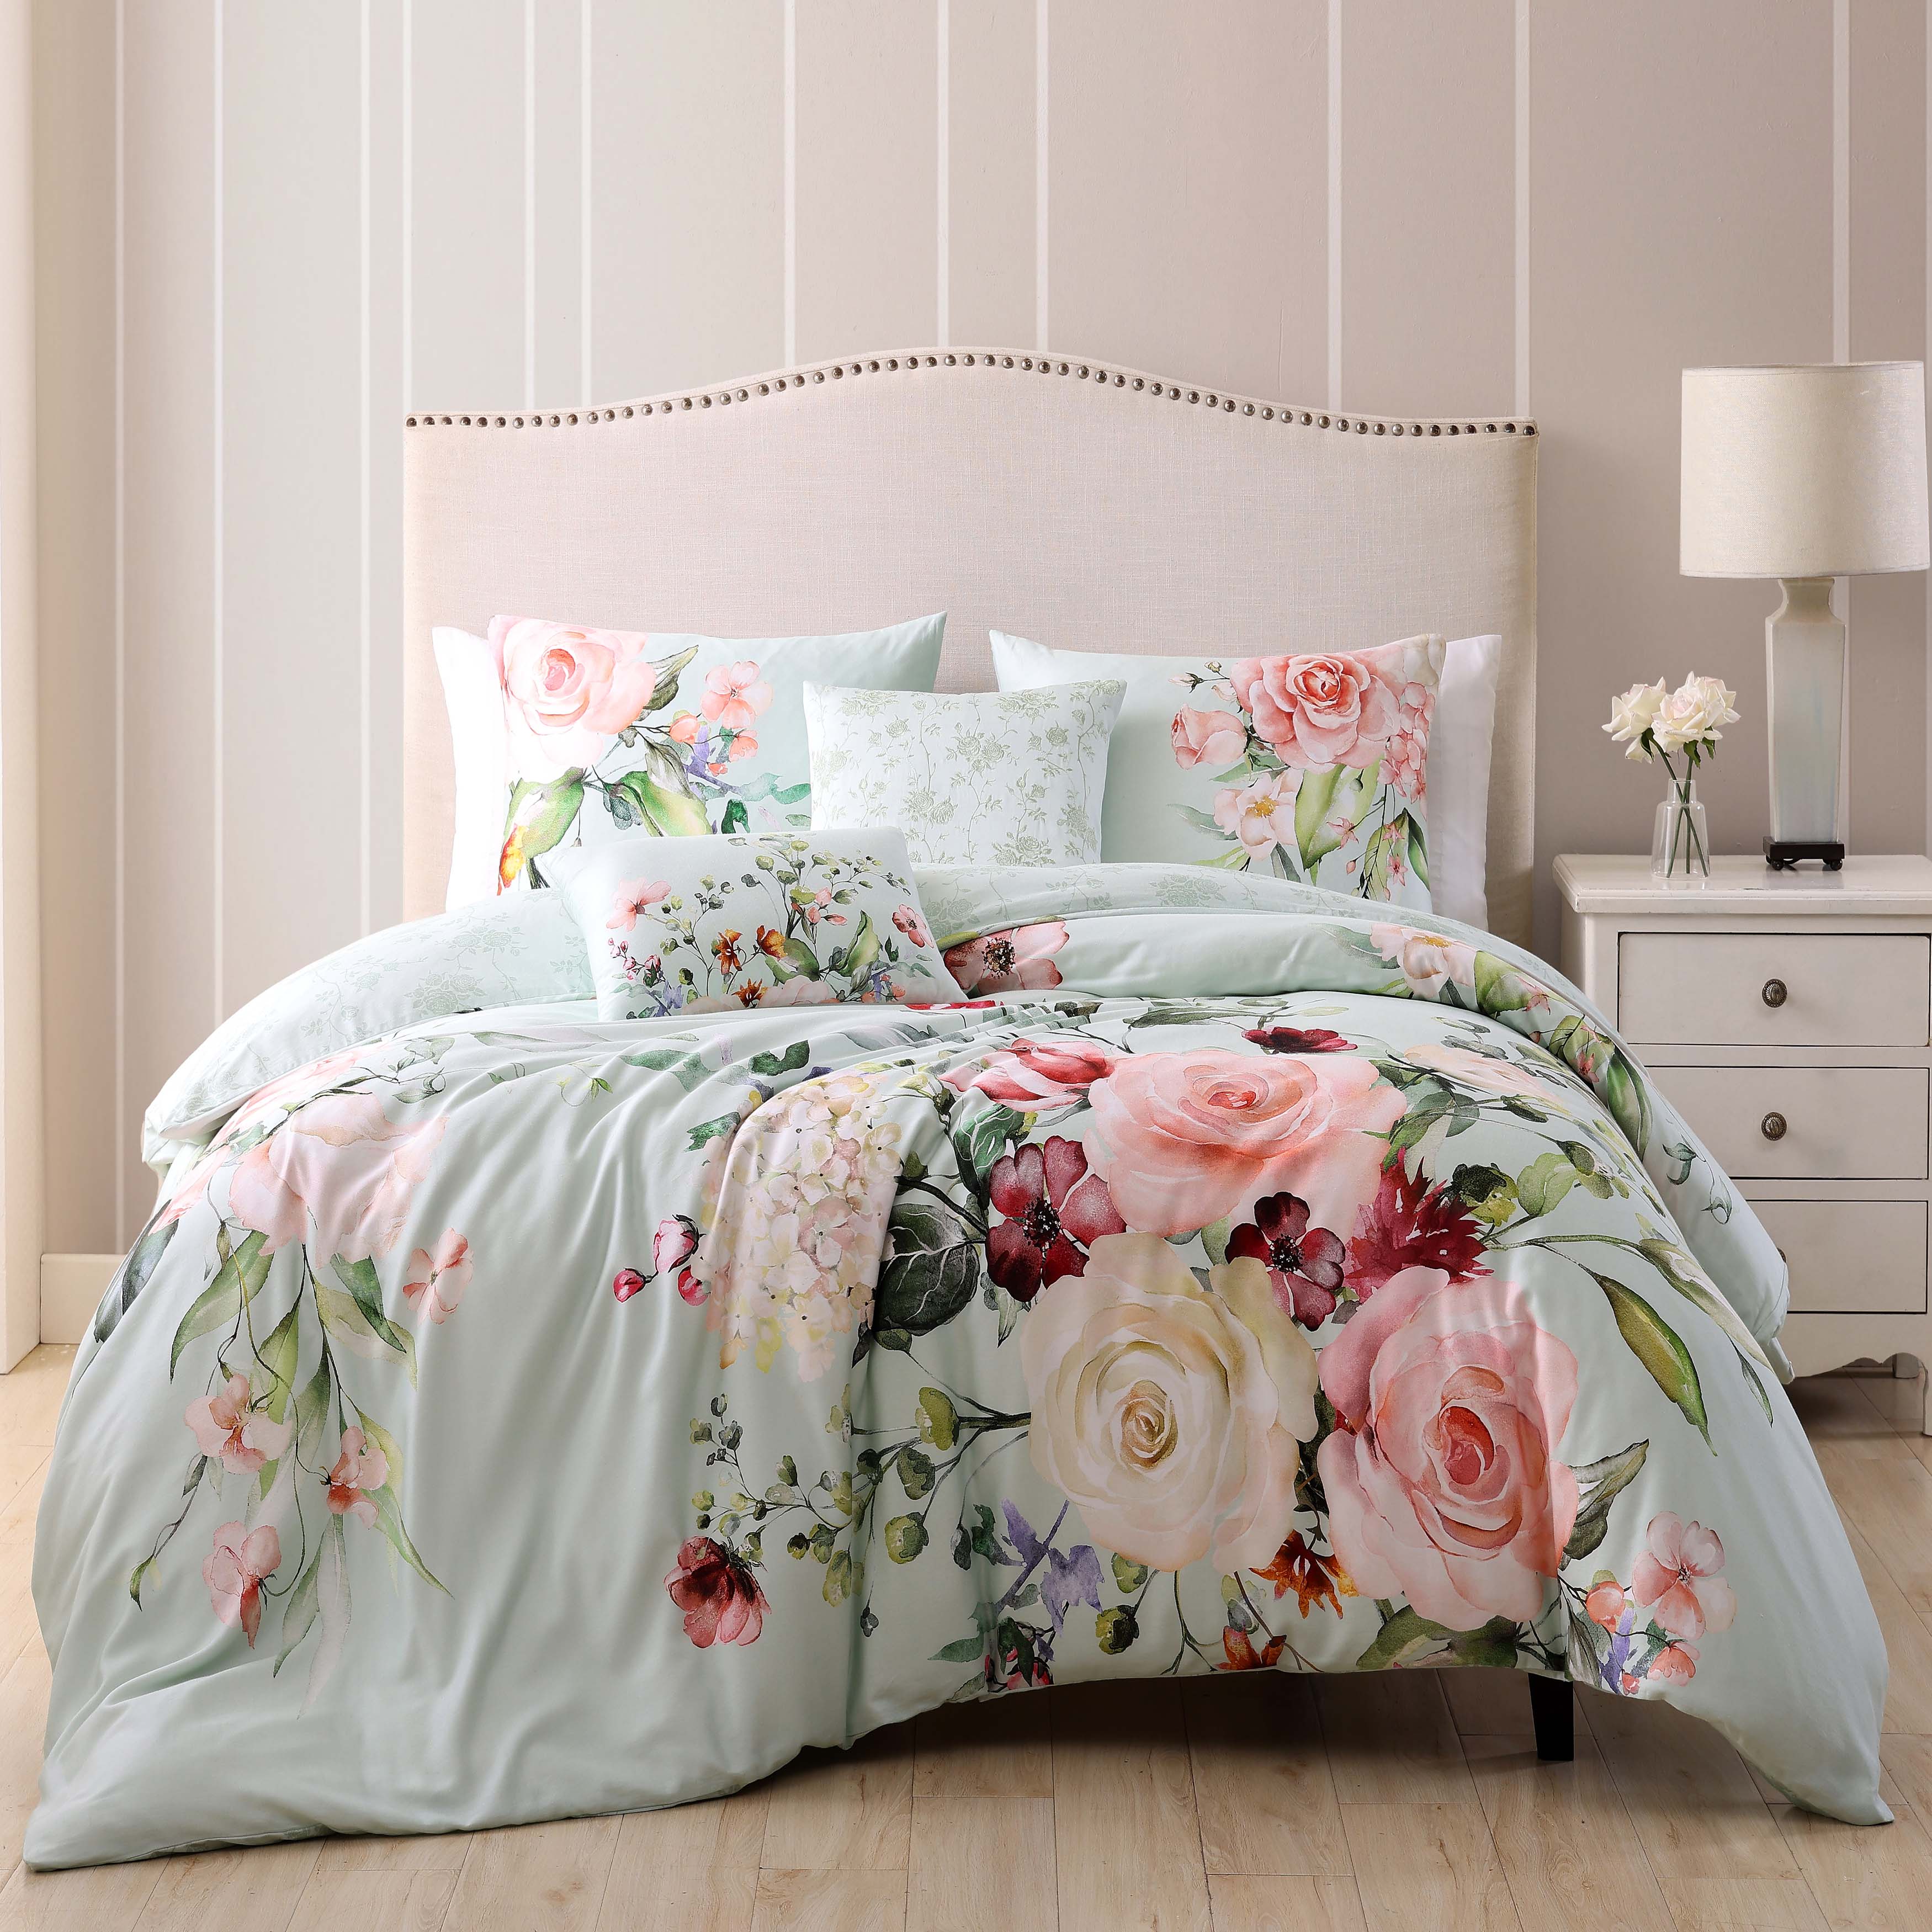 What Color Sheets Go With a Sage Green Comforter?